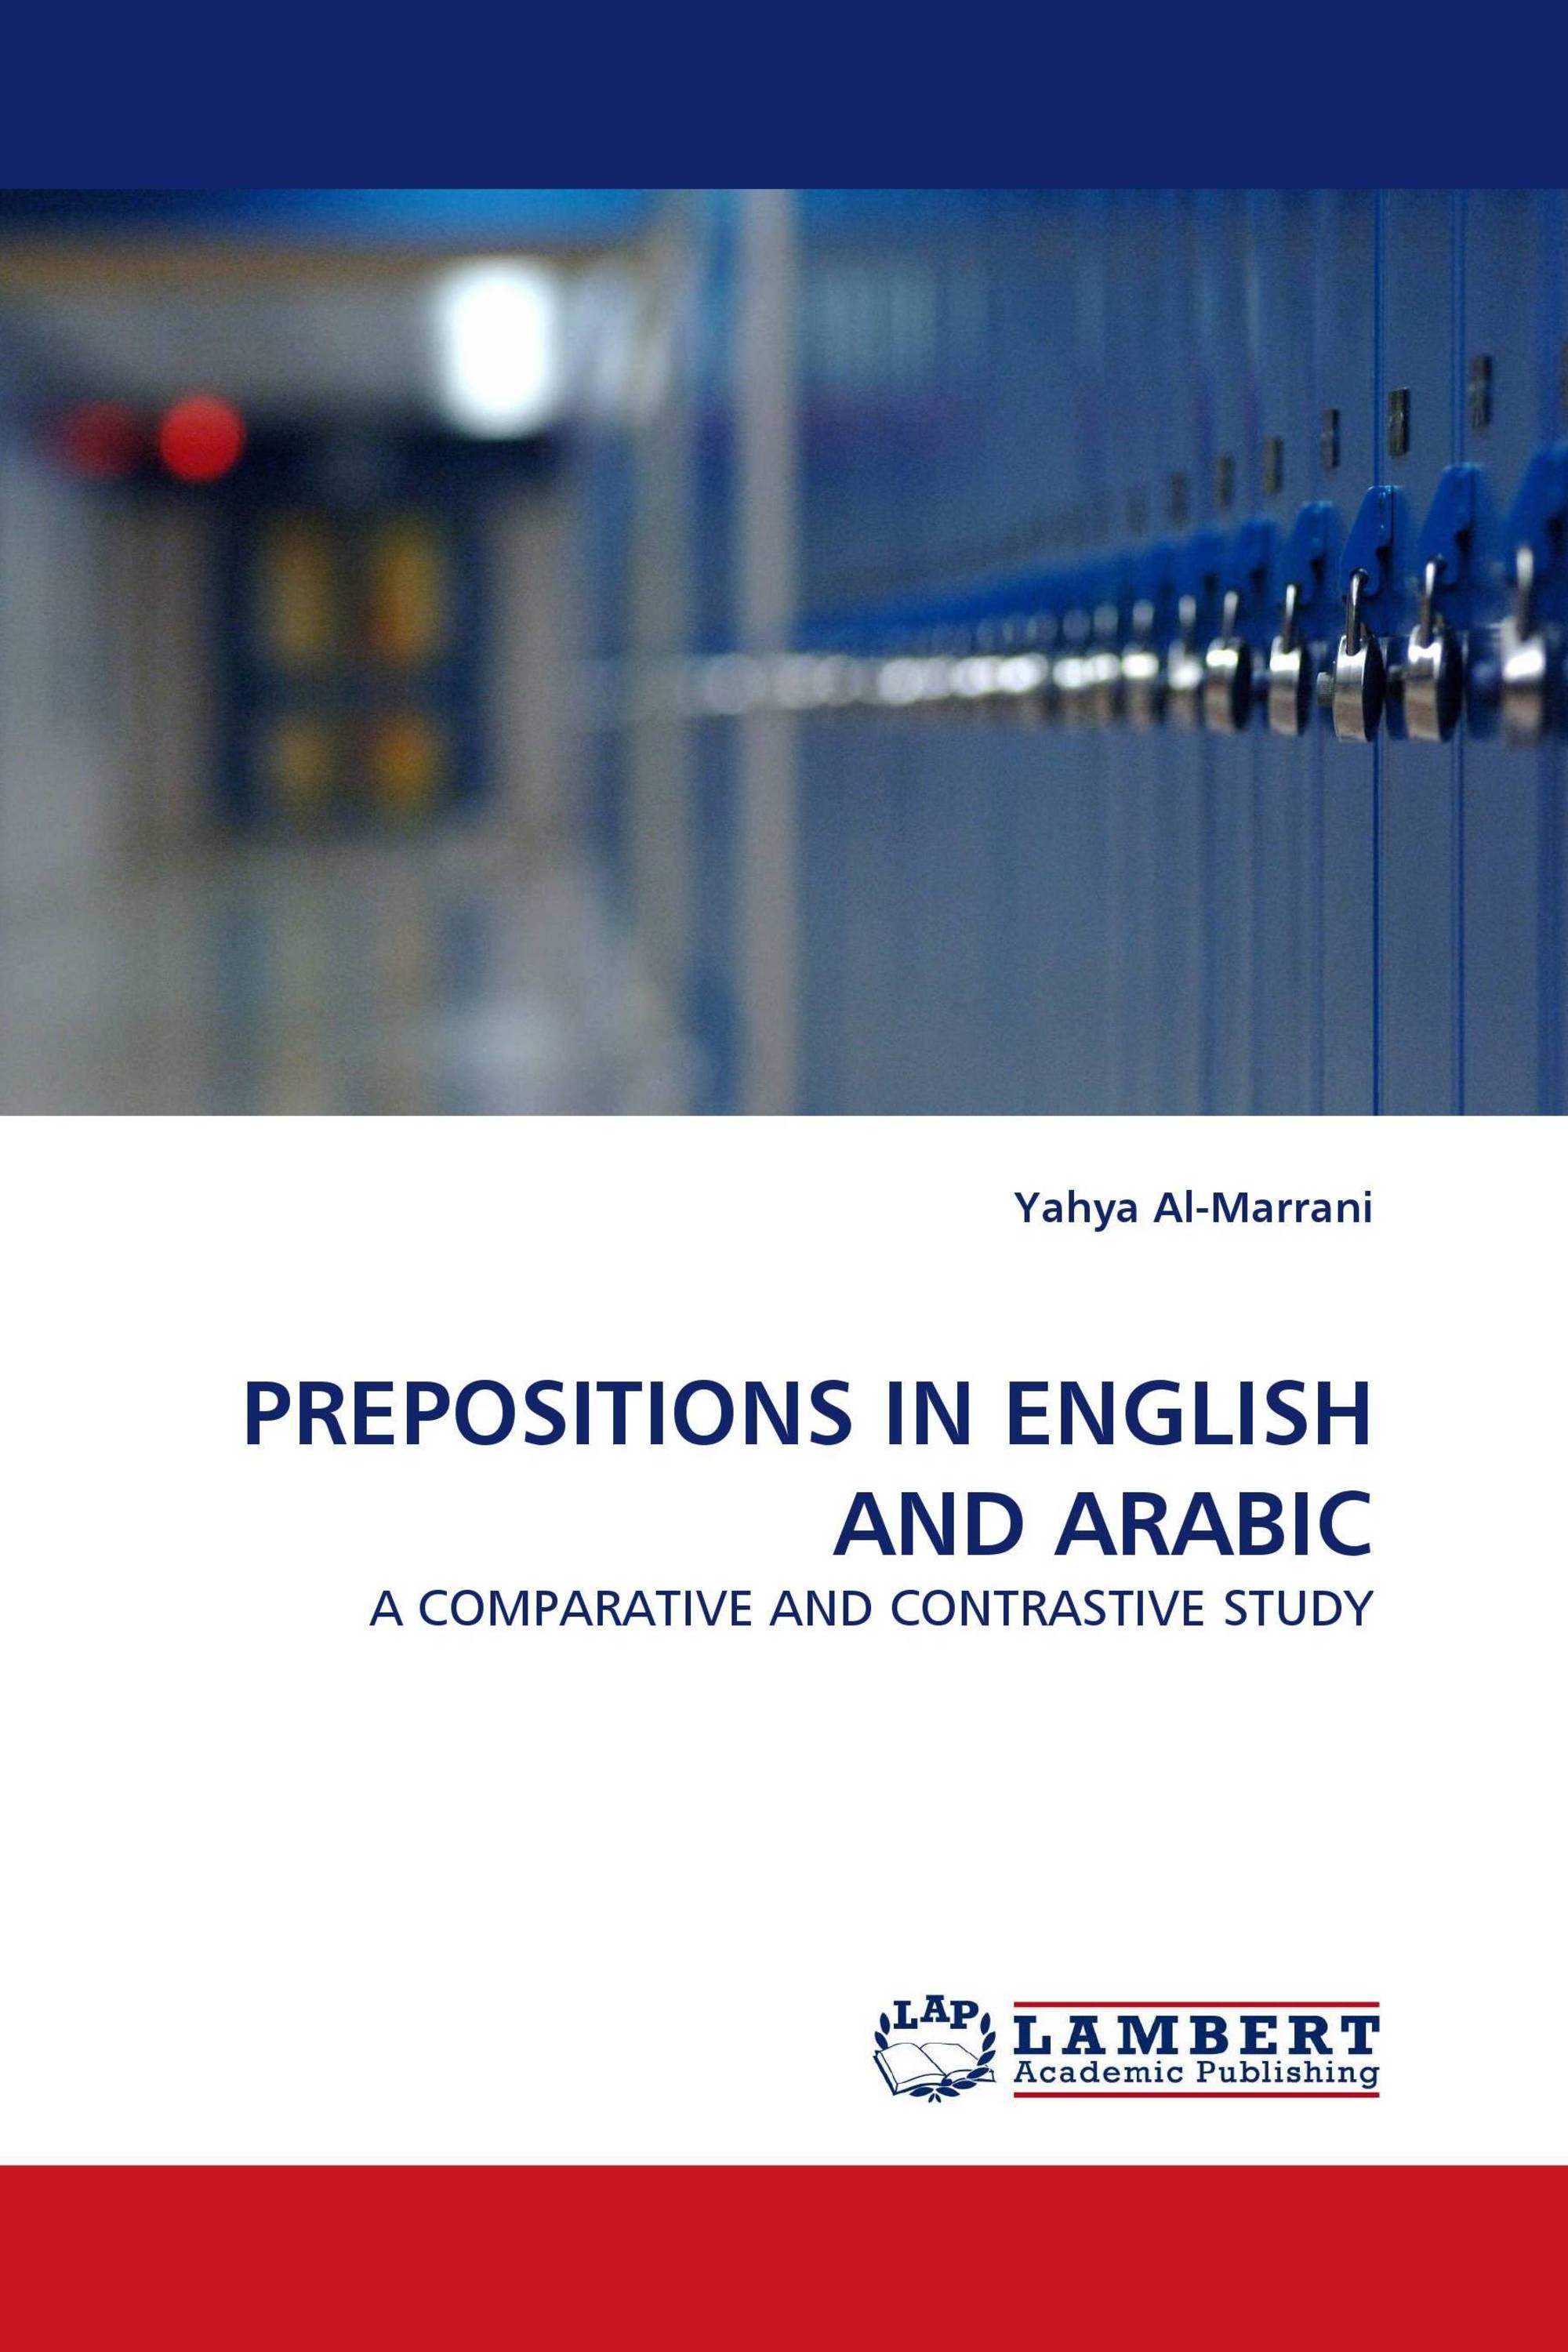 PREPOSITIONS IN ENGLISH AND ARABIC